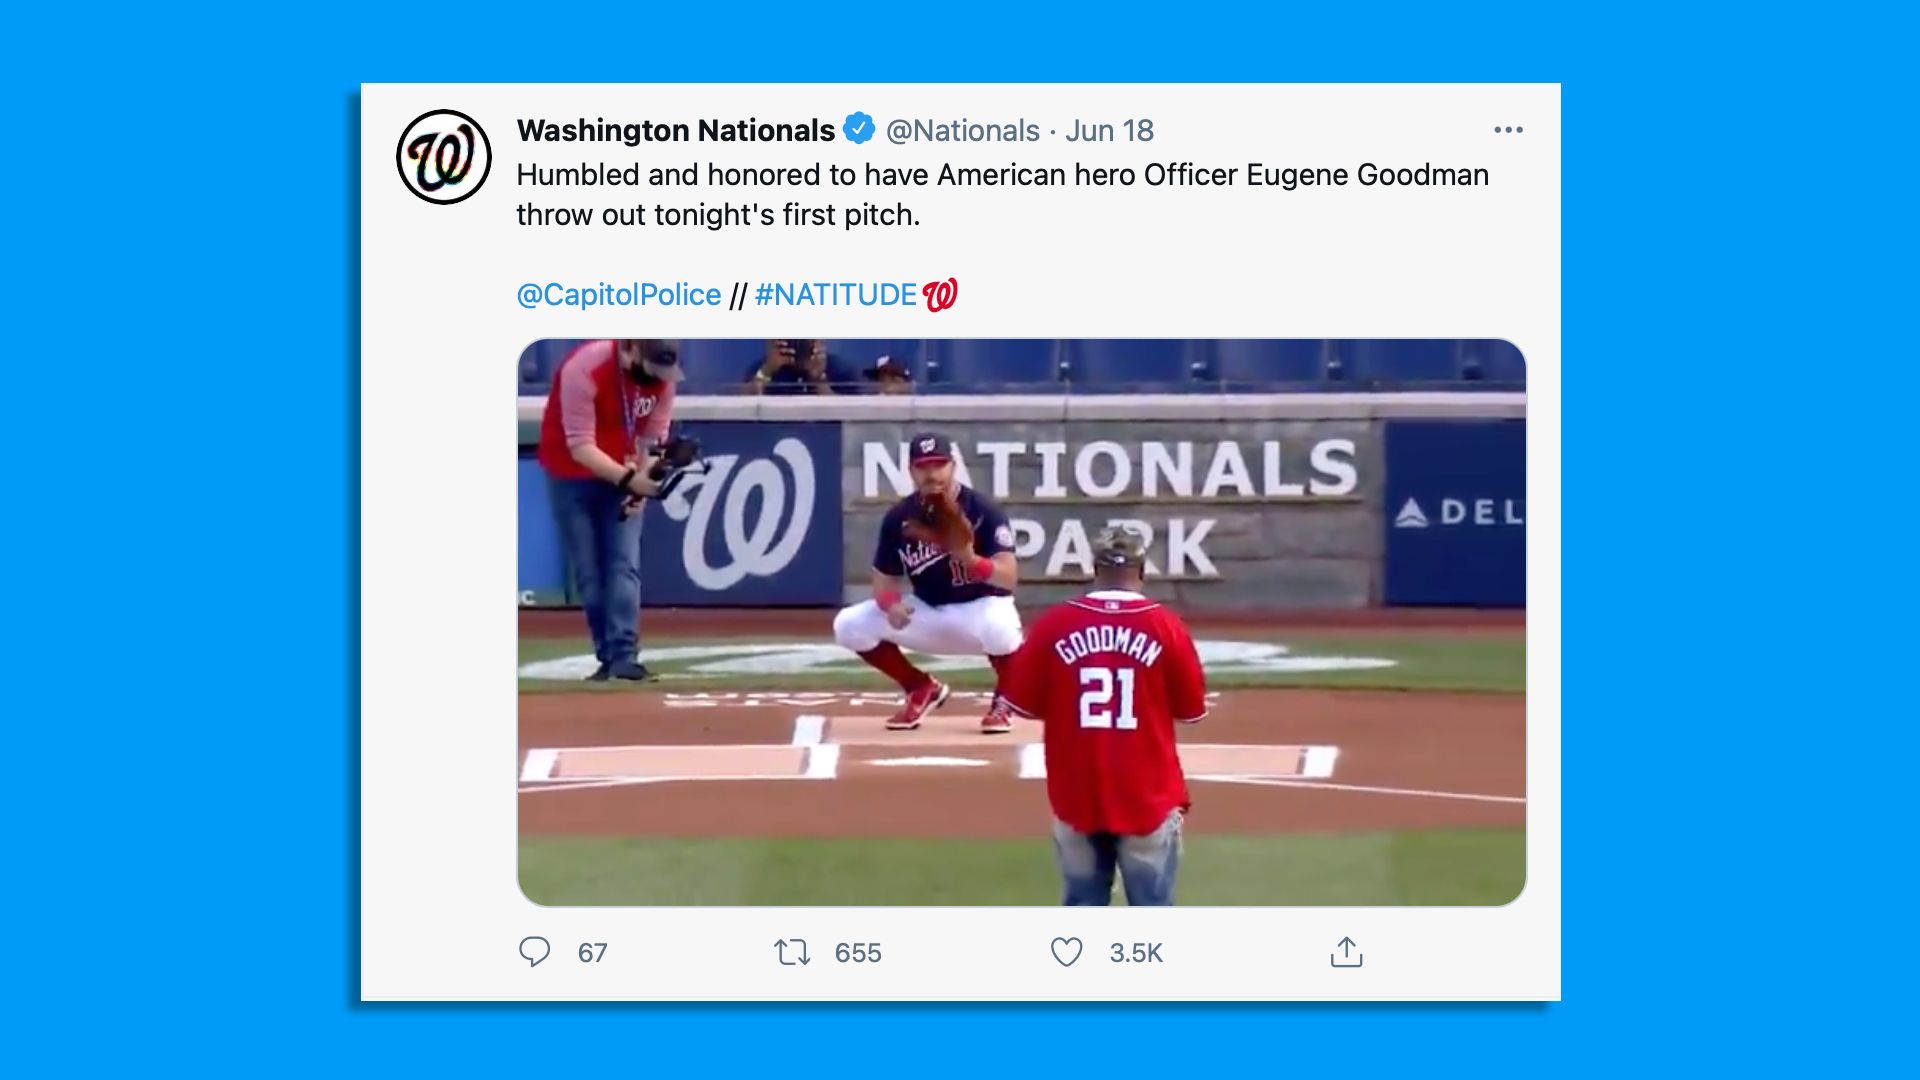 A screenshot shows Capitol Police Officer Eugene Goodman throwing out the first pitch at the Washington Nationals game on Friday.